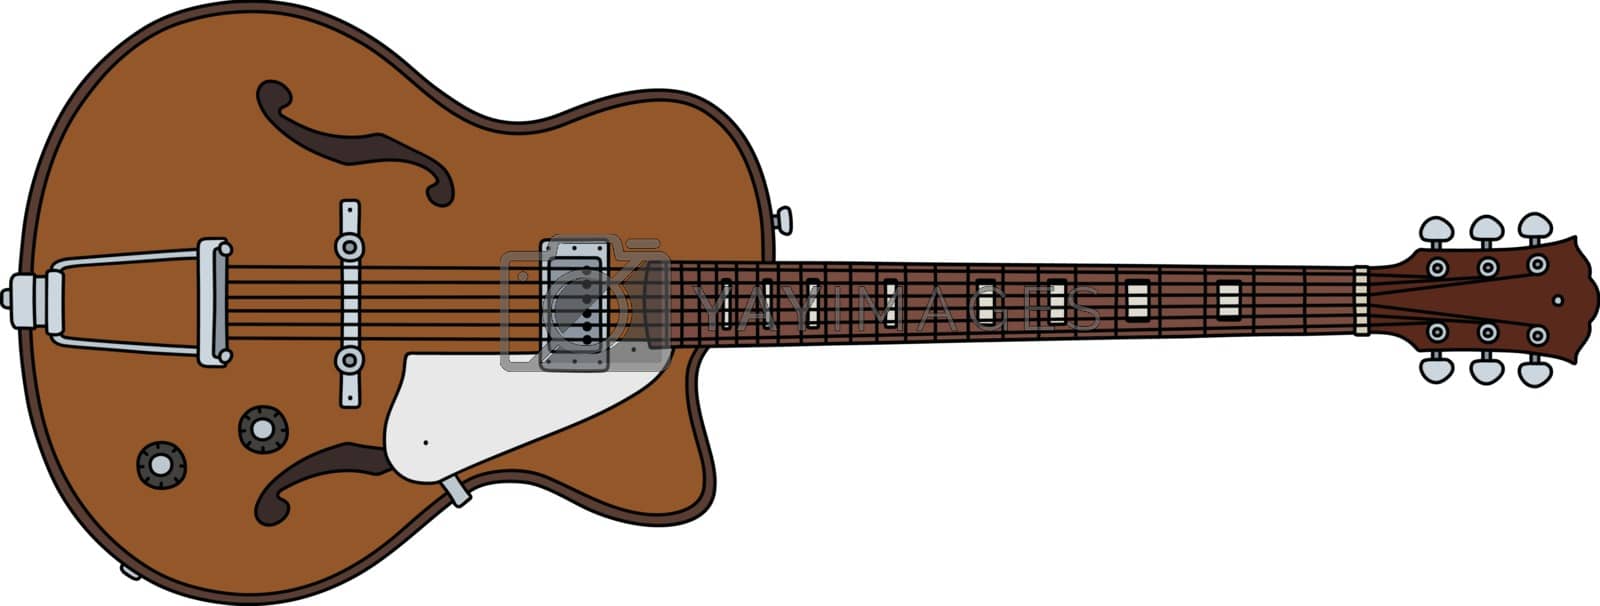 Royalty free image of The retro electric guitar by vostal